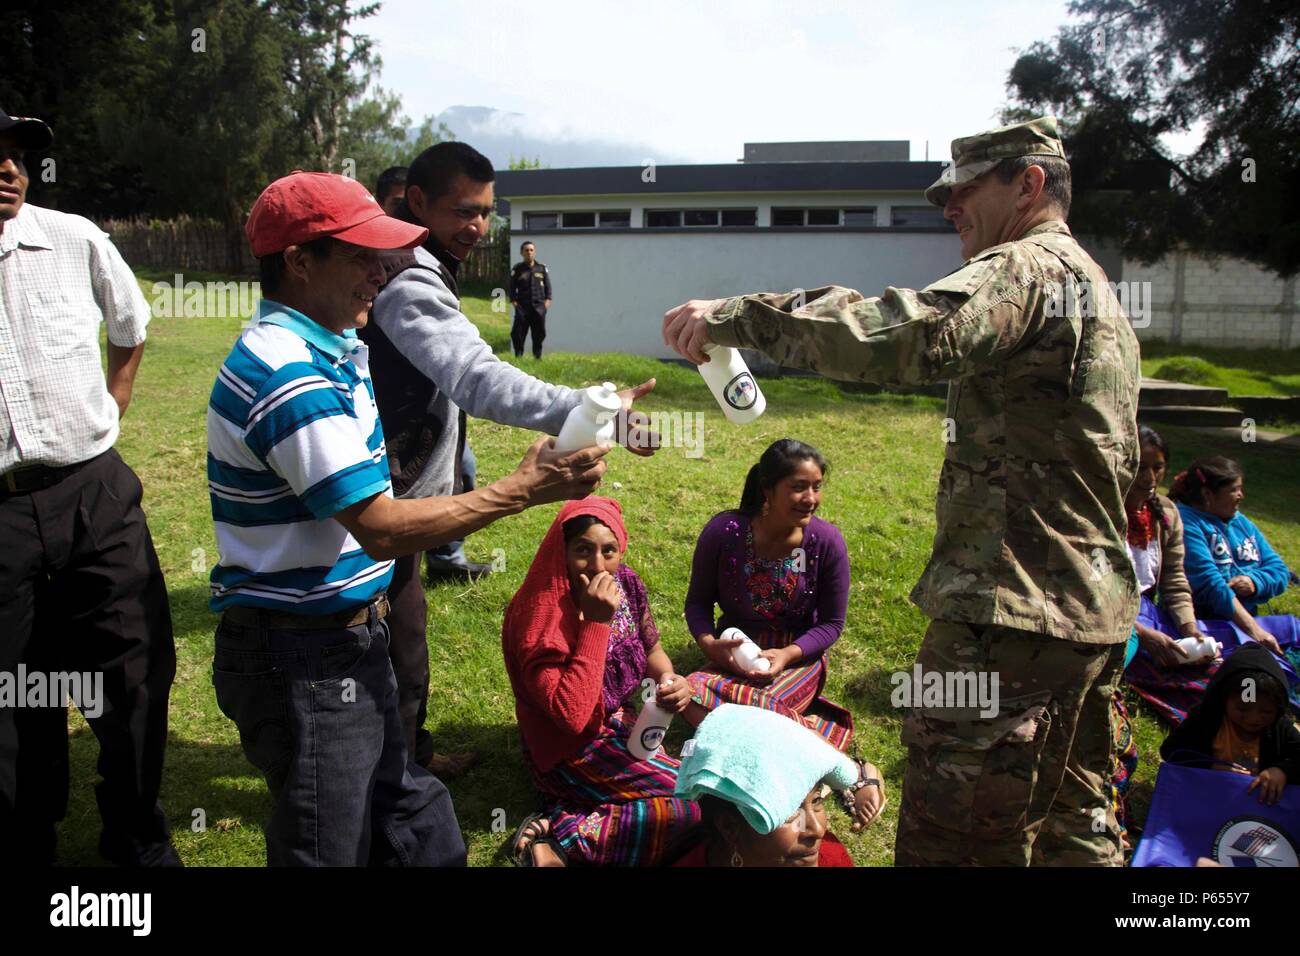 U.S. Army Staff Sgt. Brandon Hudgins gives bags and water bottles to Guatemalan citizens to show comradery between the two partner nations and to promote the future medical treatment sites at San Marcos, Guatemala, April 30, 2016. Task Force Red Wolf and Army South conducts Humanitarian Civil Assistance Training to include tactical level construction projects and Medical Readiness Training Exercises providing medical access and building schools in Guatemala with the Guatemalan Government and non-government agencies from 05MAR16 to 18JUN16 in order to improve the mission readiness of US forces  Stock Photo